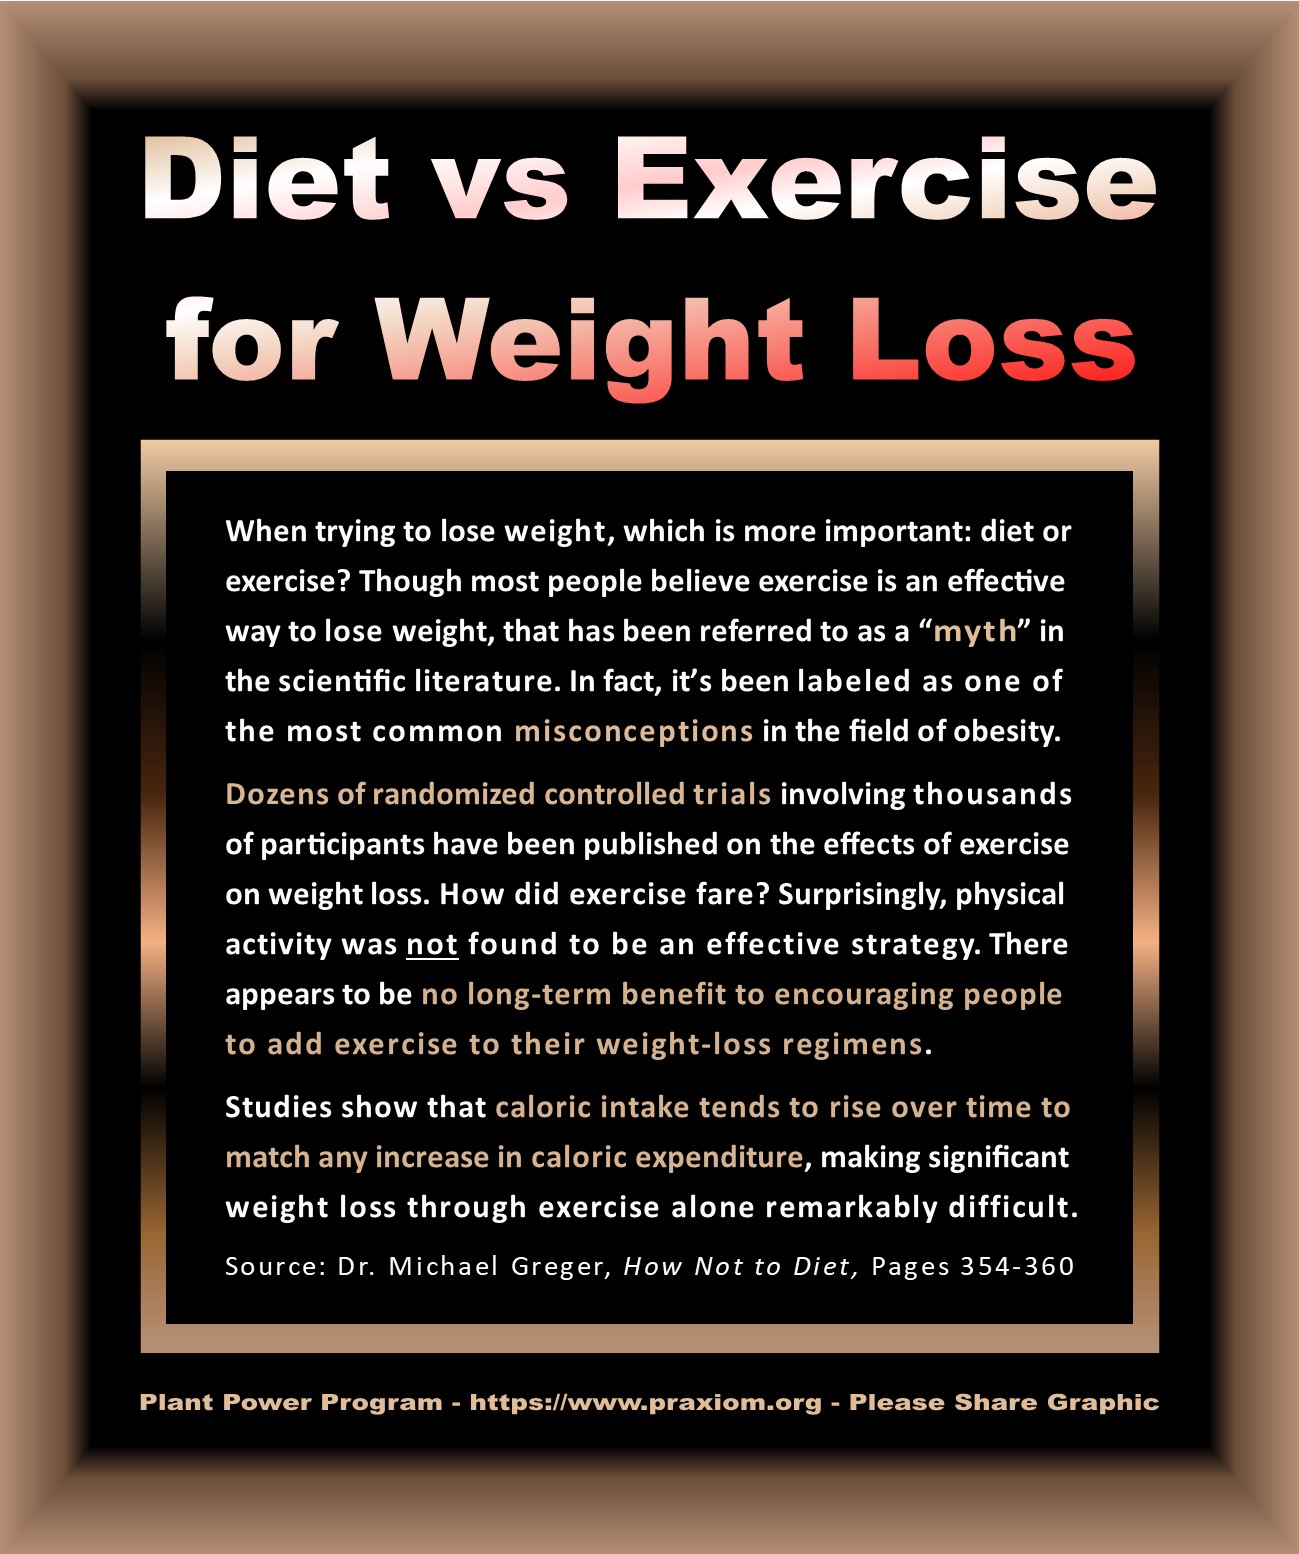 Diet vs Exercise for Weight Loss - Dr. Michael Greger